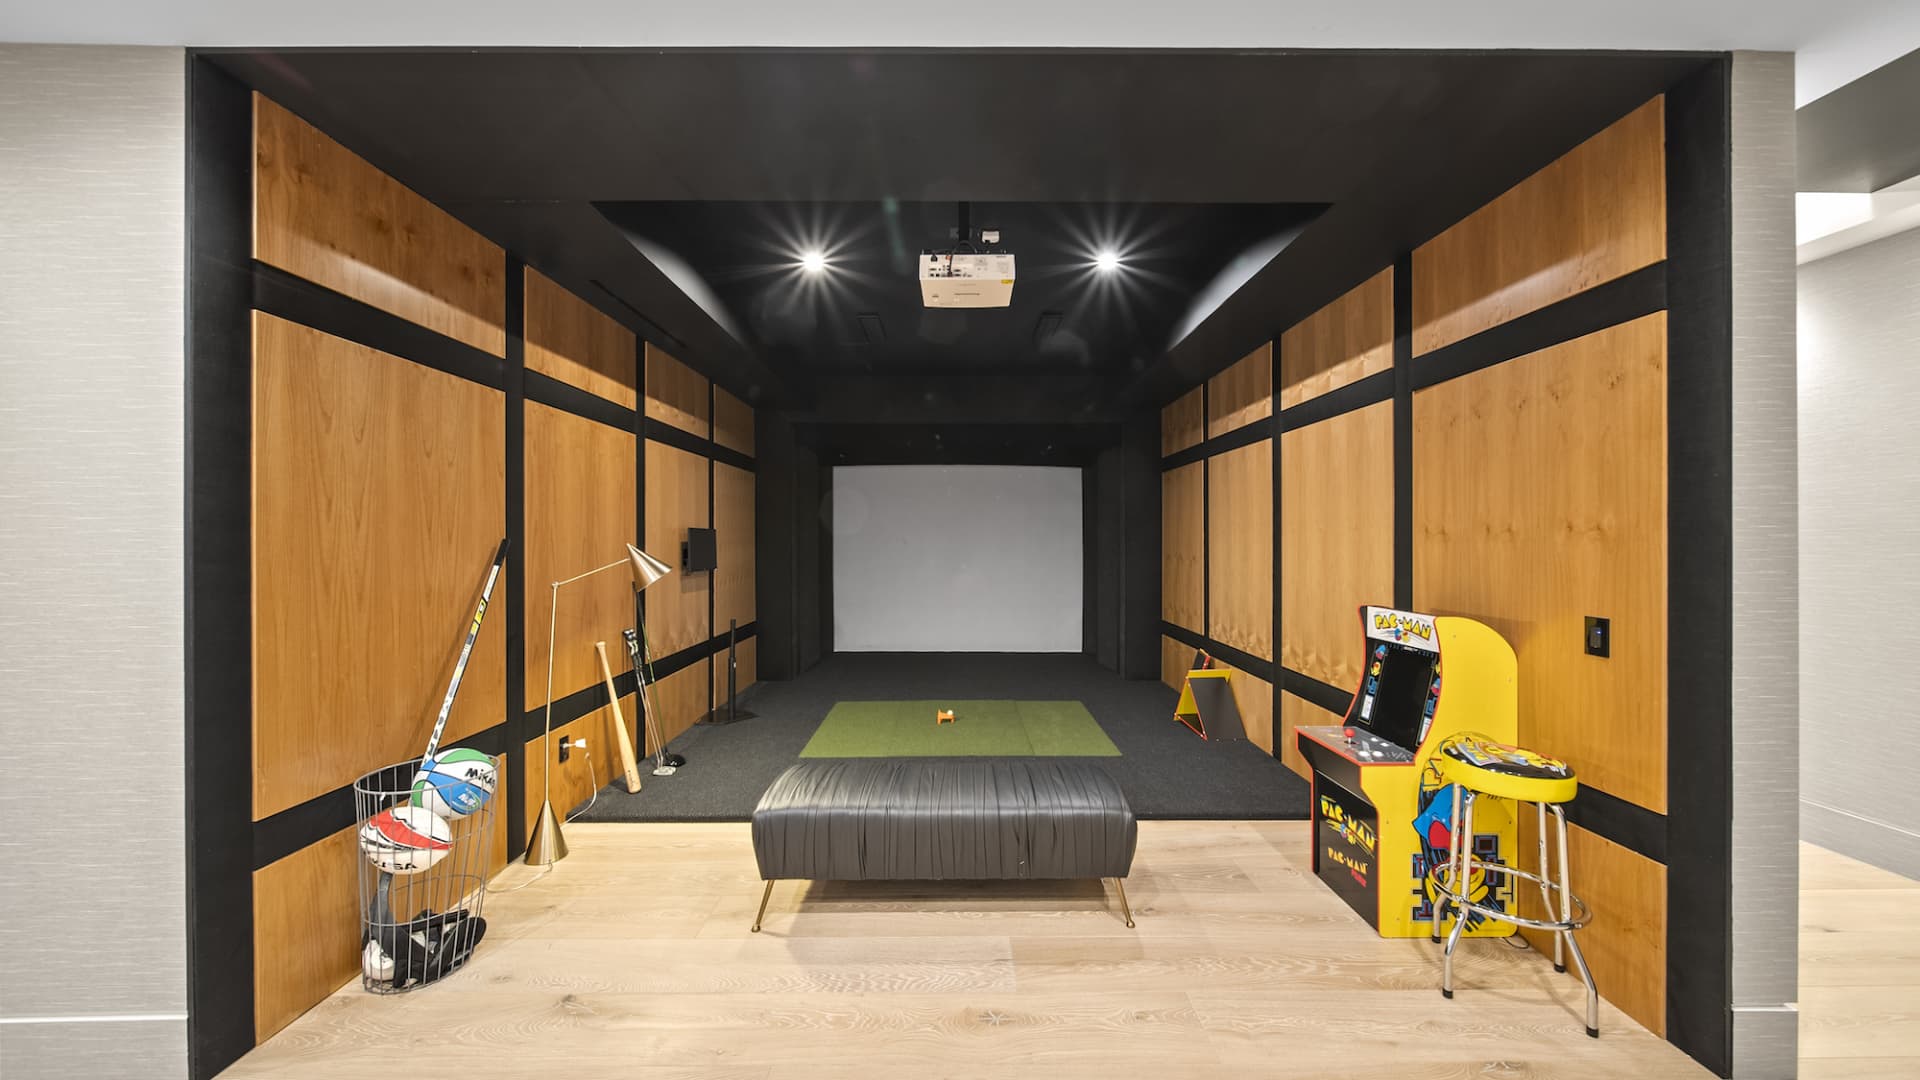 The Star Resort's sport simulation room offers virtual golf, hockey and soccer.